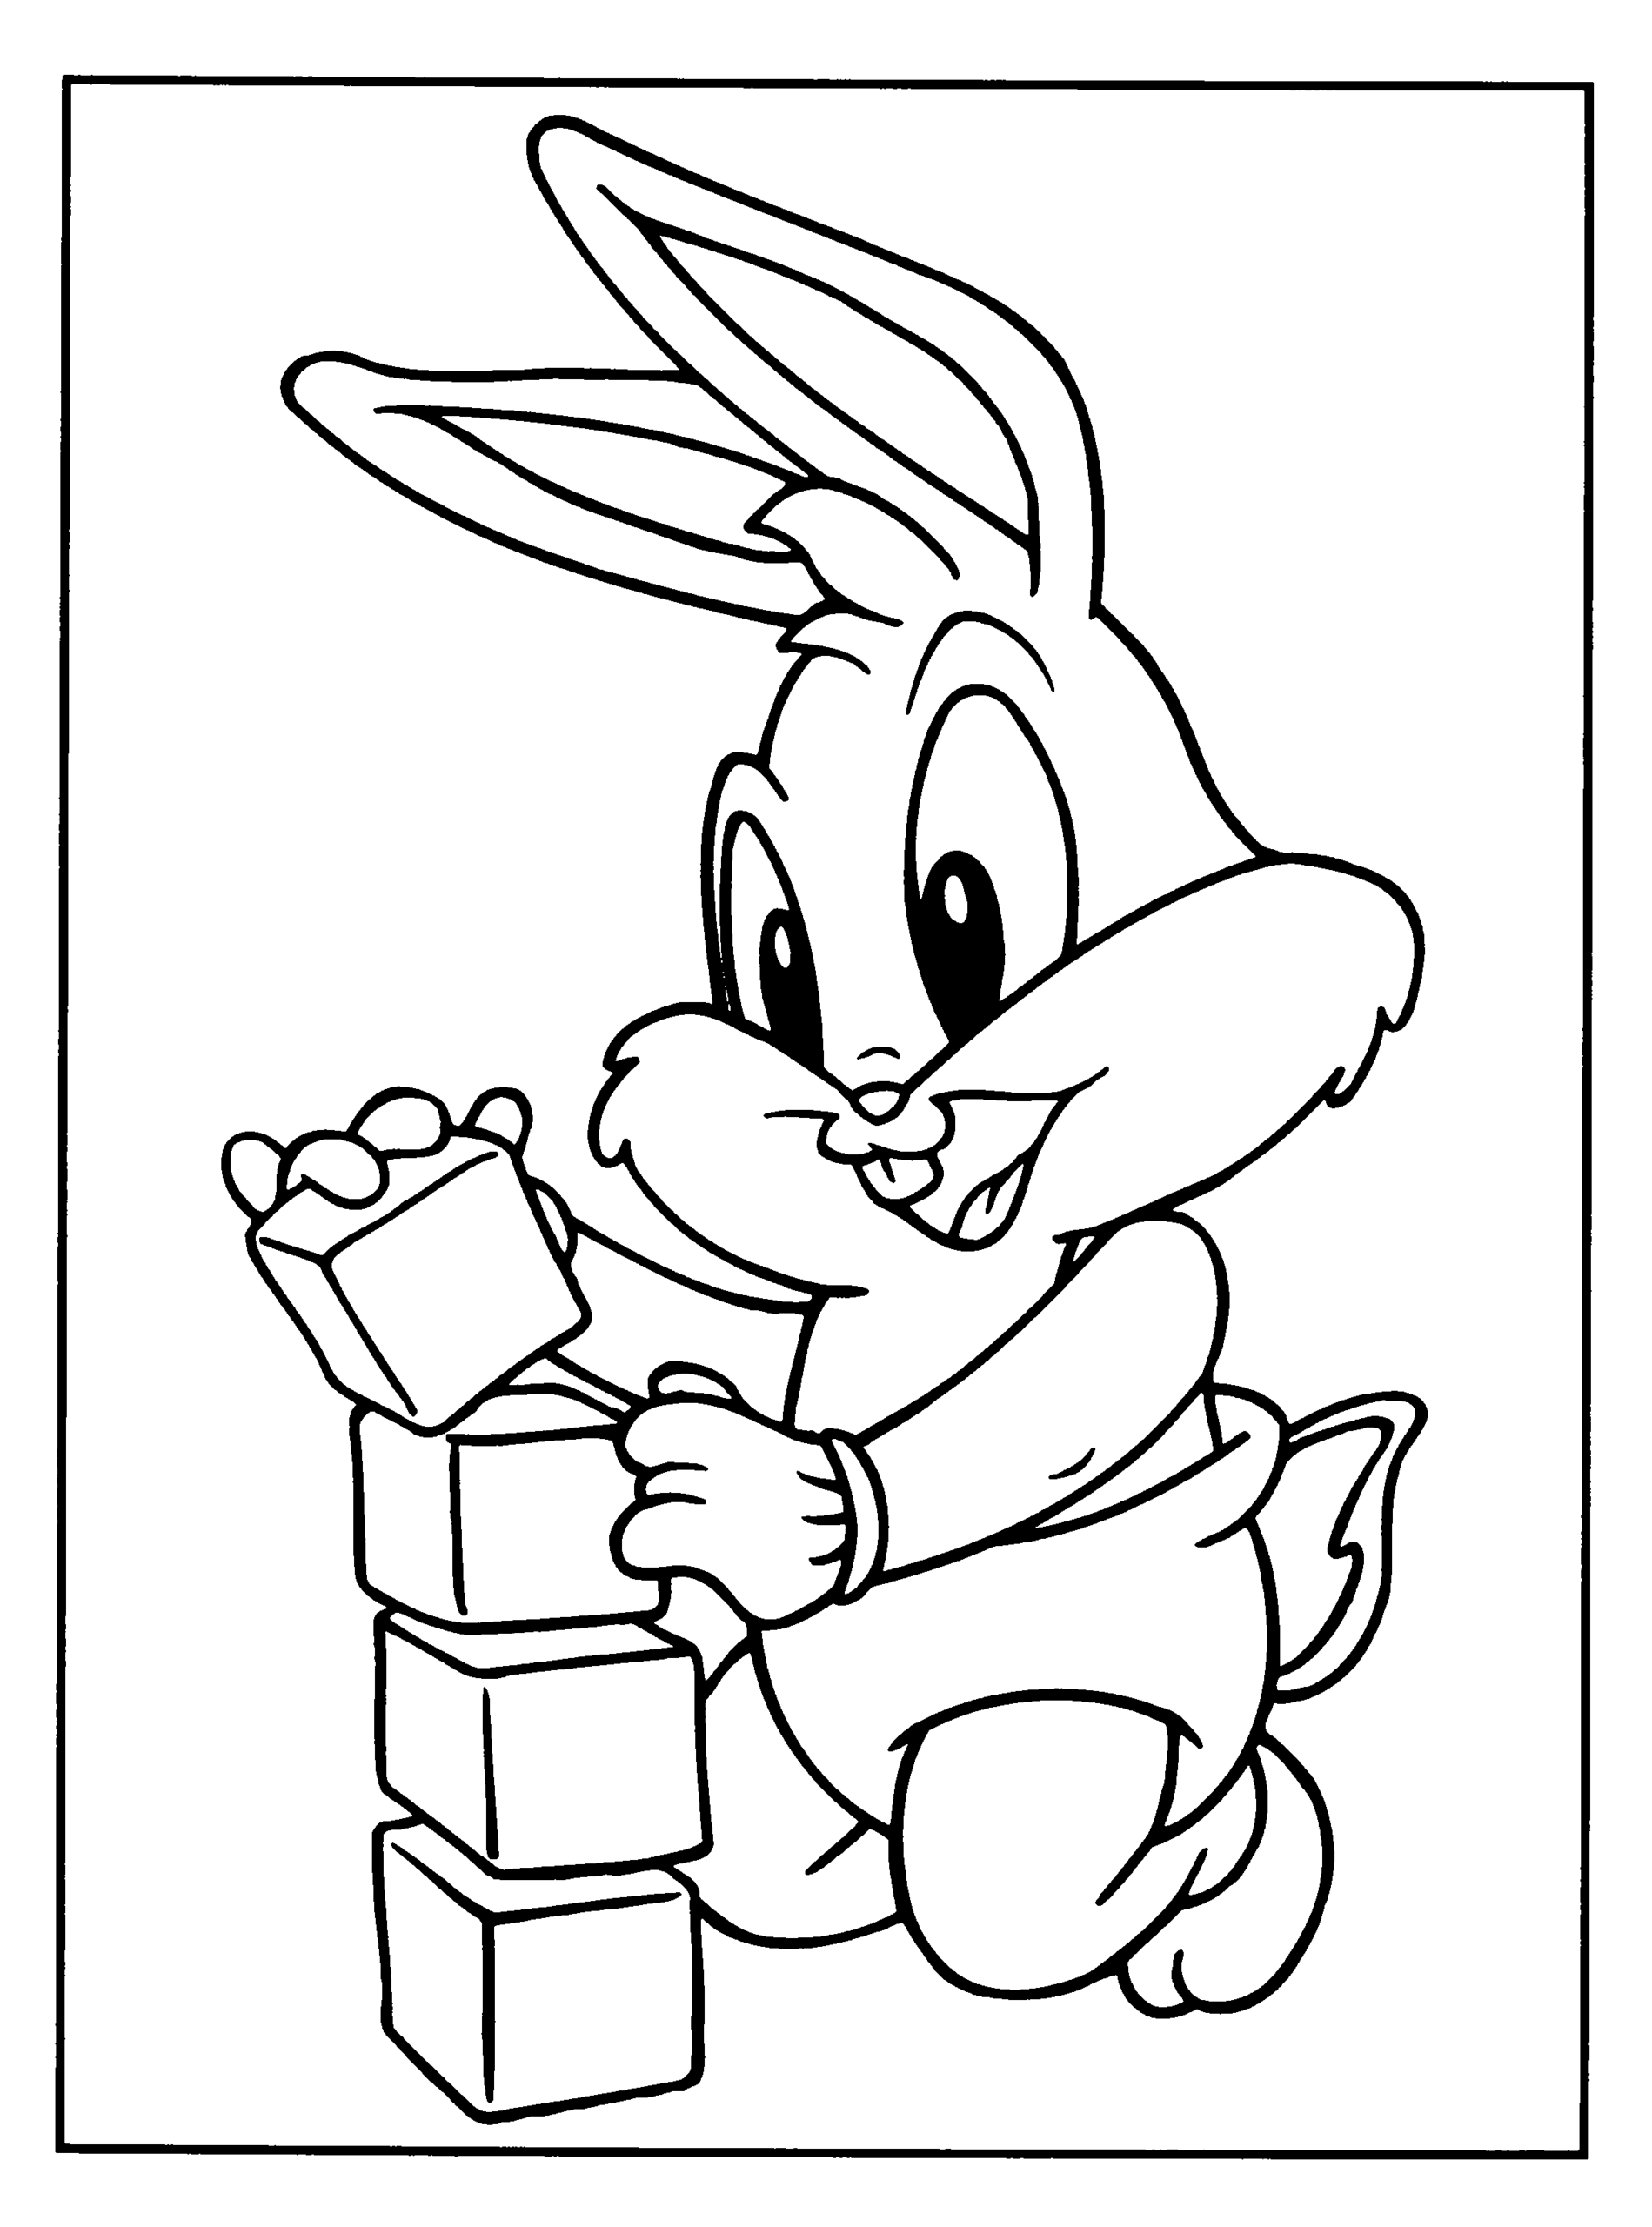 Looney Tunes Coloring Pages TV Film looney tunes 15 Printable 2020 04581 Coloring4free